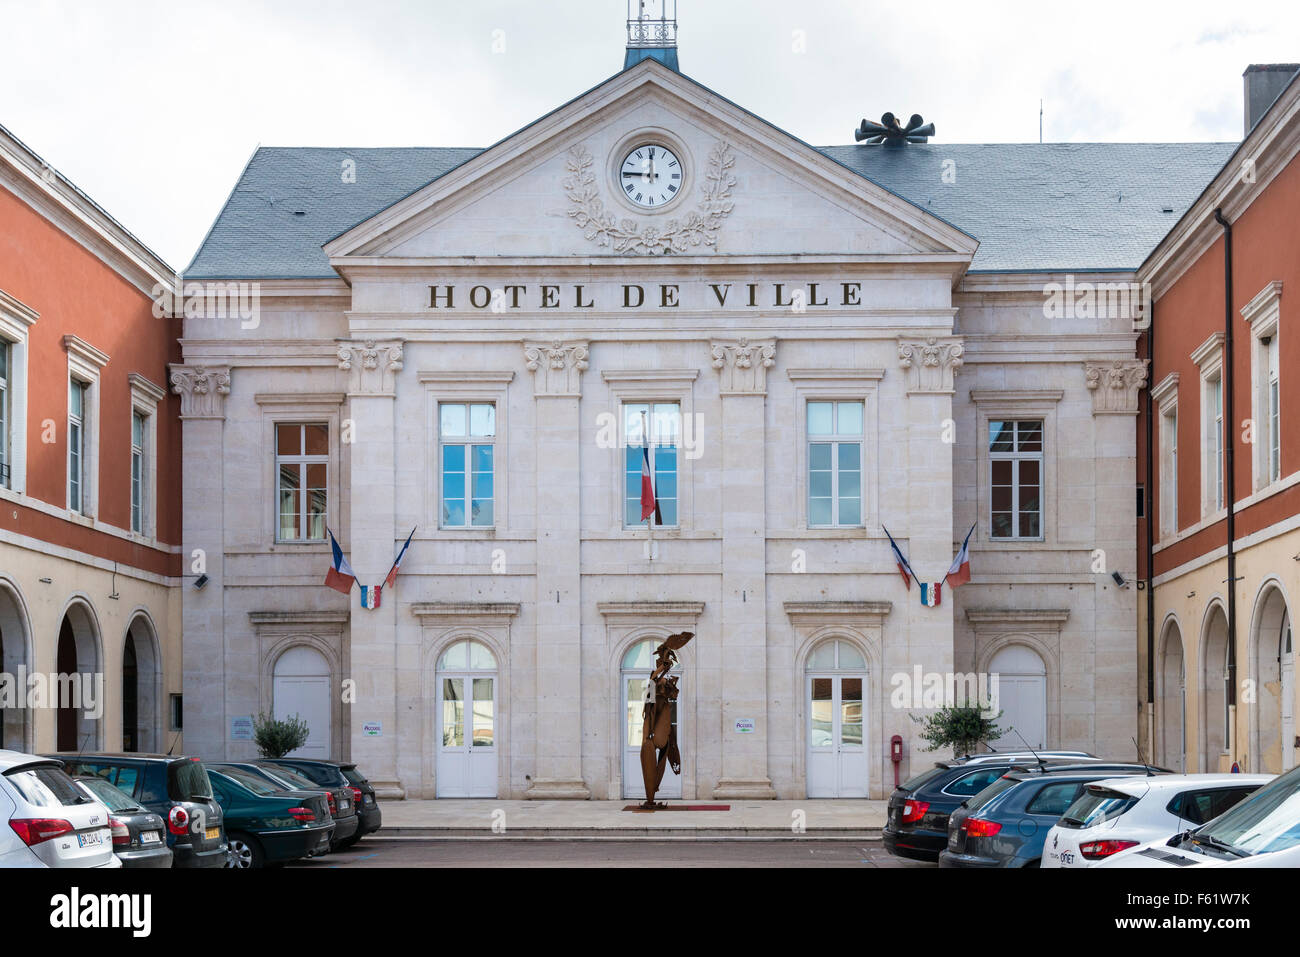 The Hotel De Ville or town hall in the town of Chagny France Stock Photo